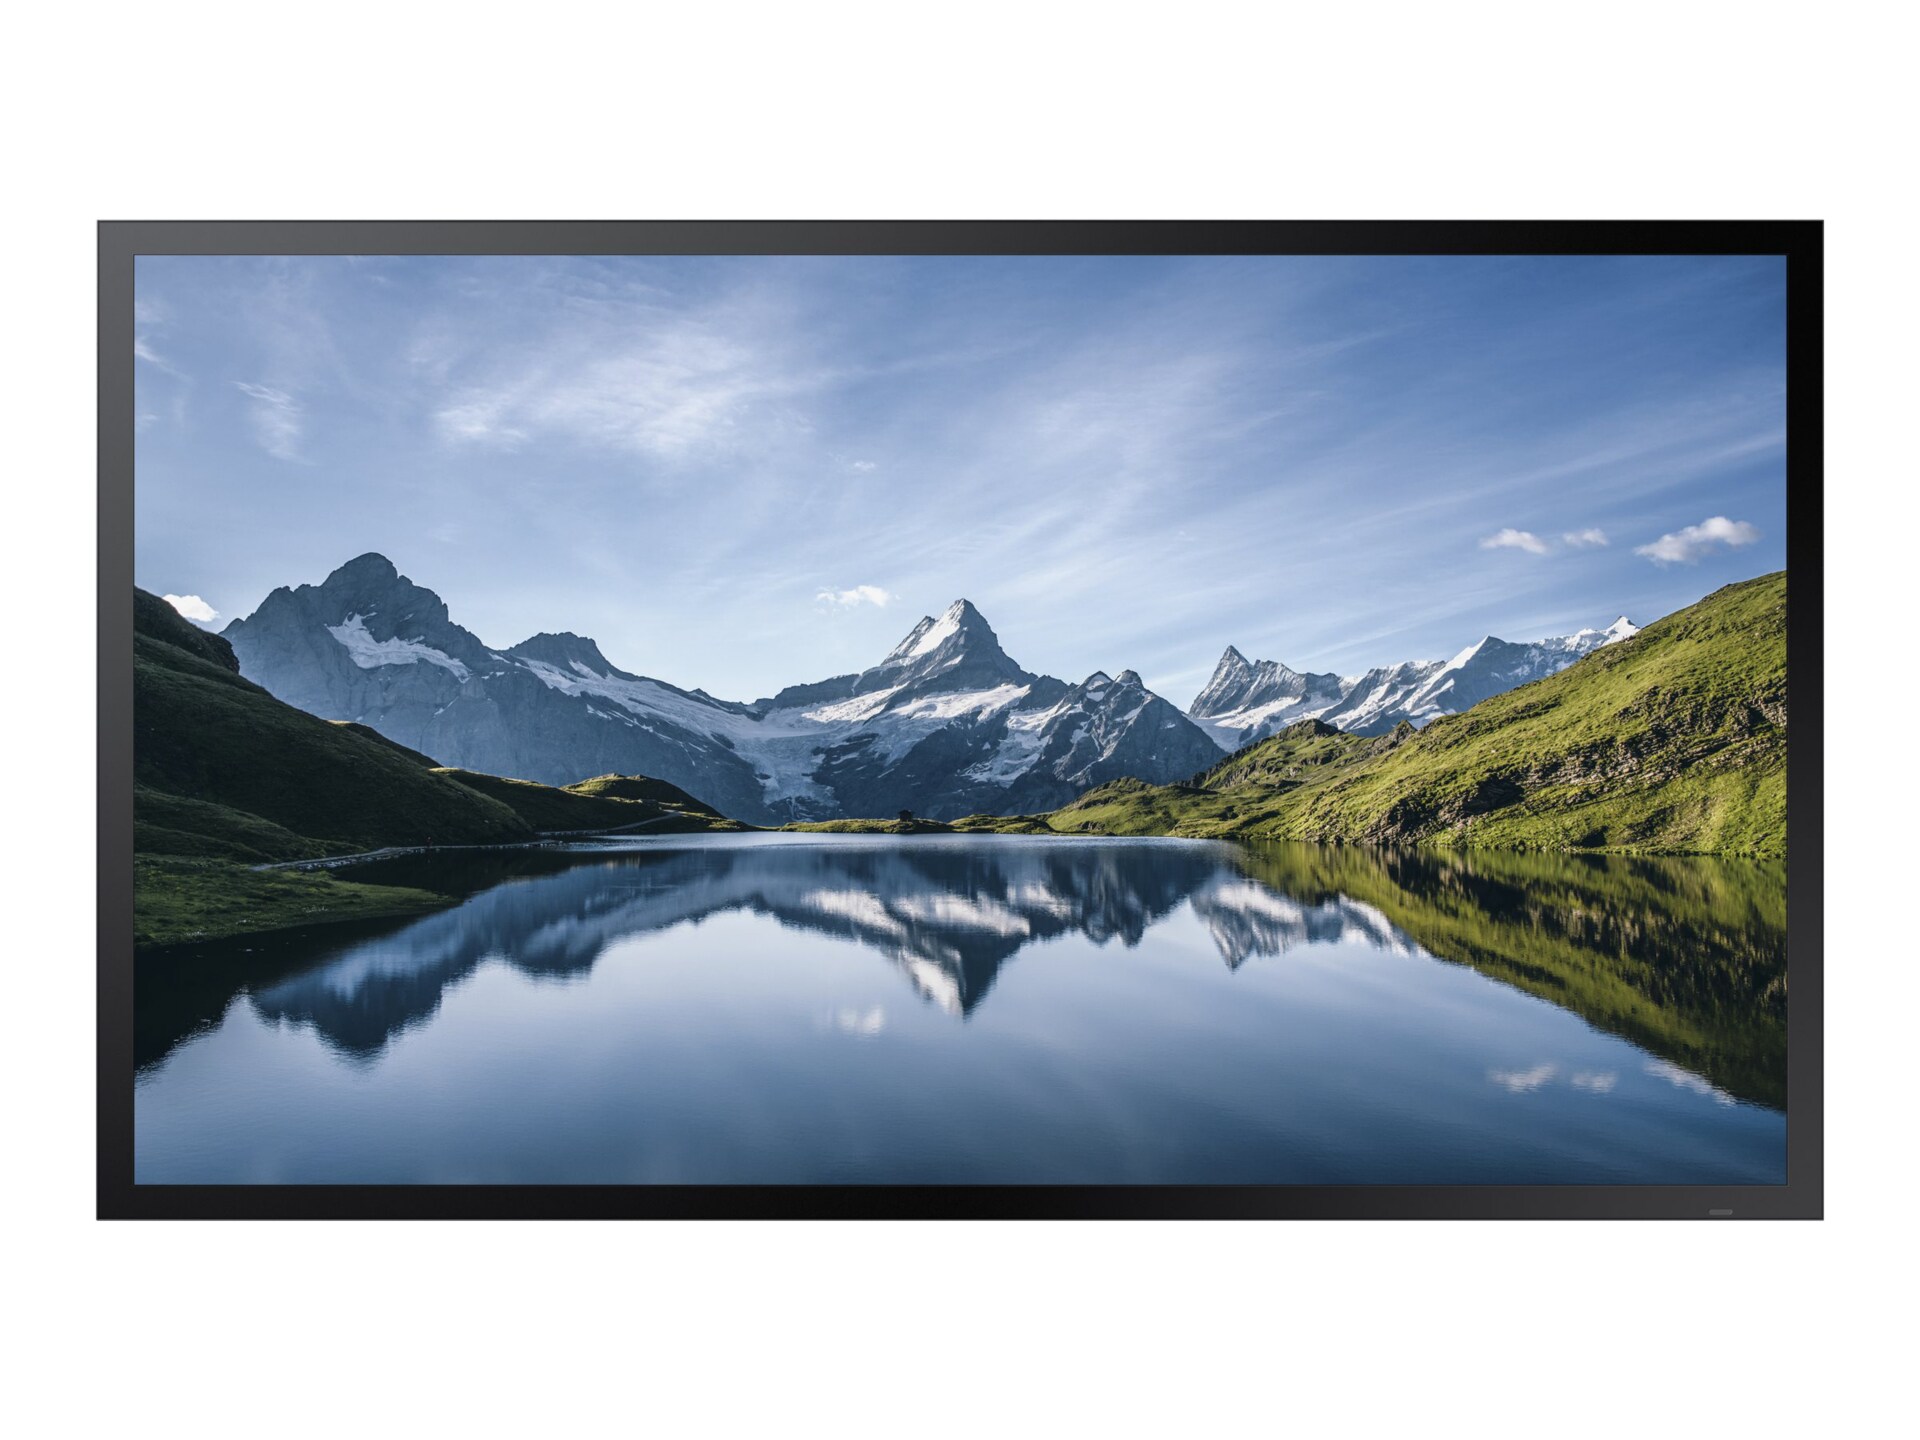 Samsung OH46B-S OHB-S Series - 46" LED-backlit LCD display - Full HD - outd